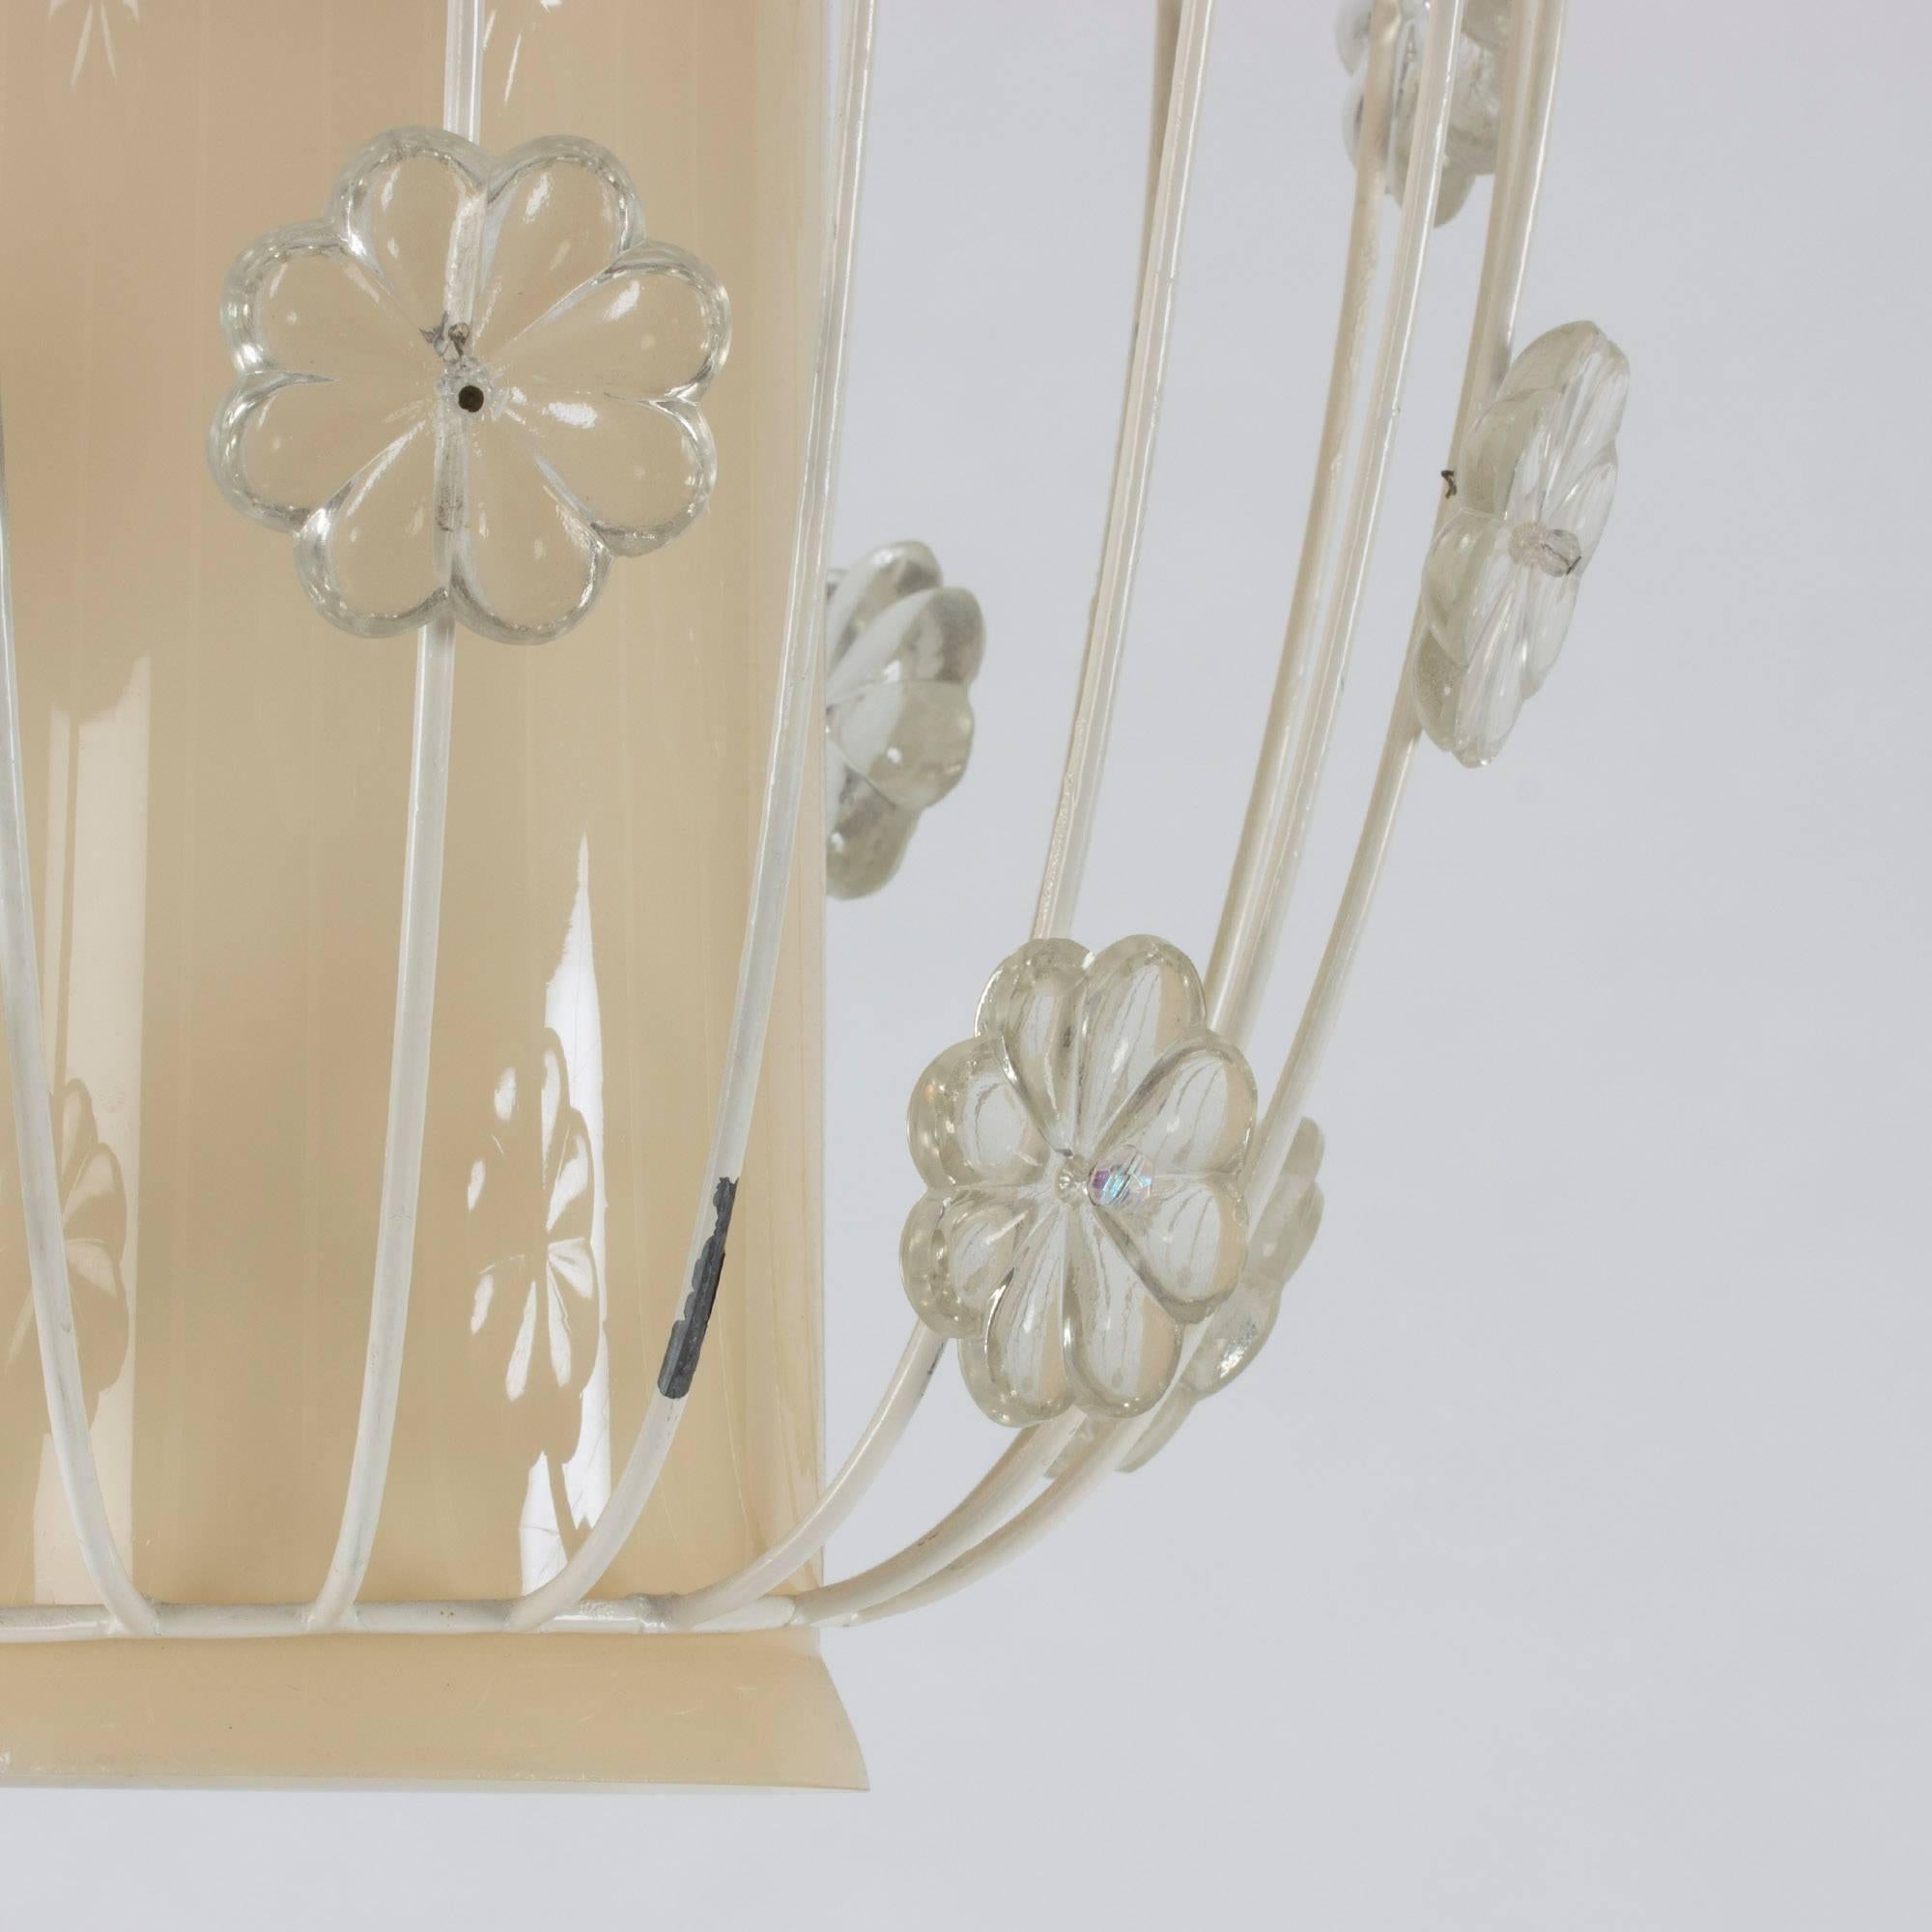 Mid-20th Century Swedish 1950s Glass and Lacquered Metal Ceiling Lamp